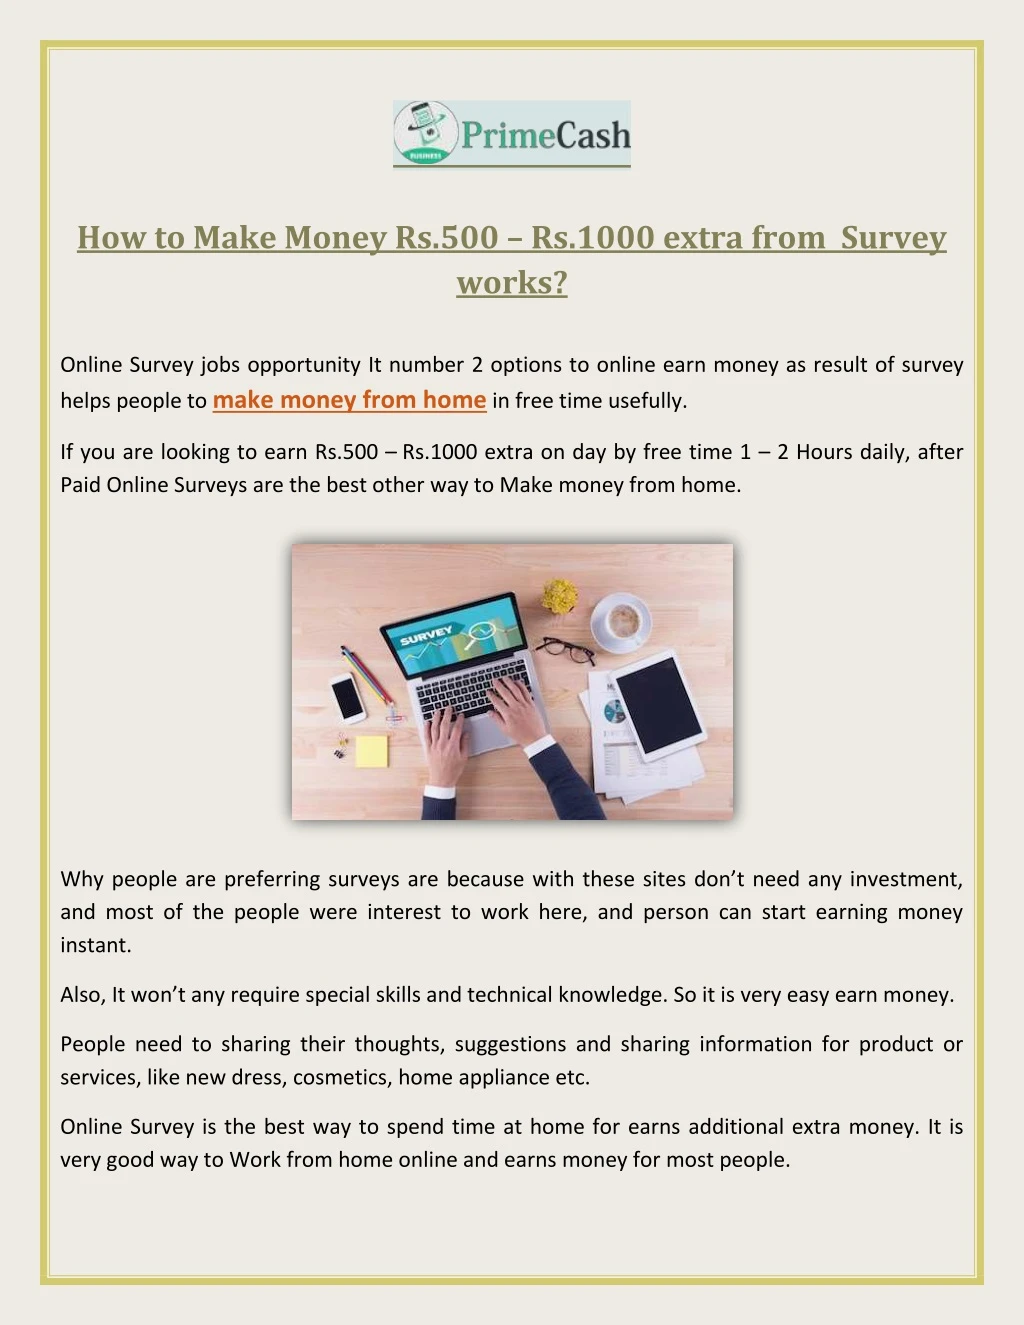 how to make money rs 500 rs 1000 extra from